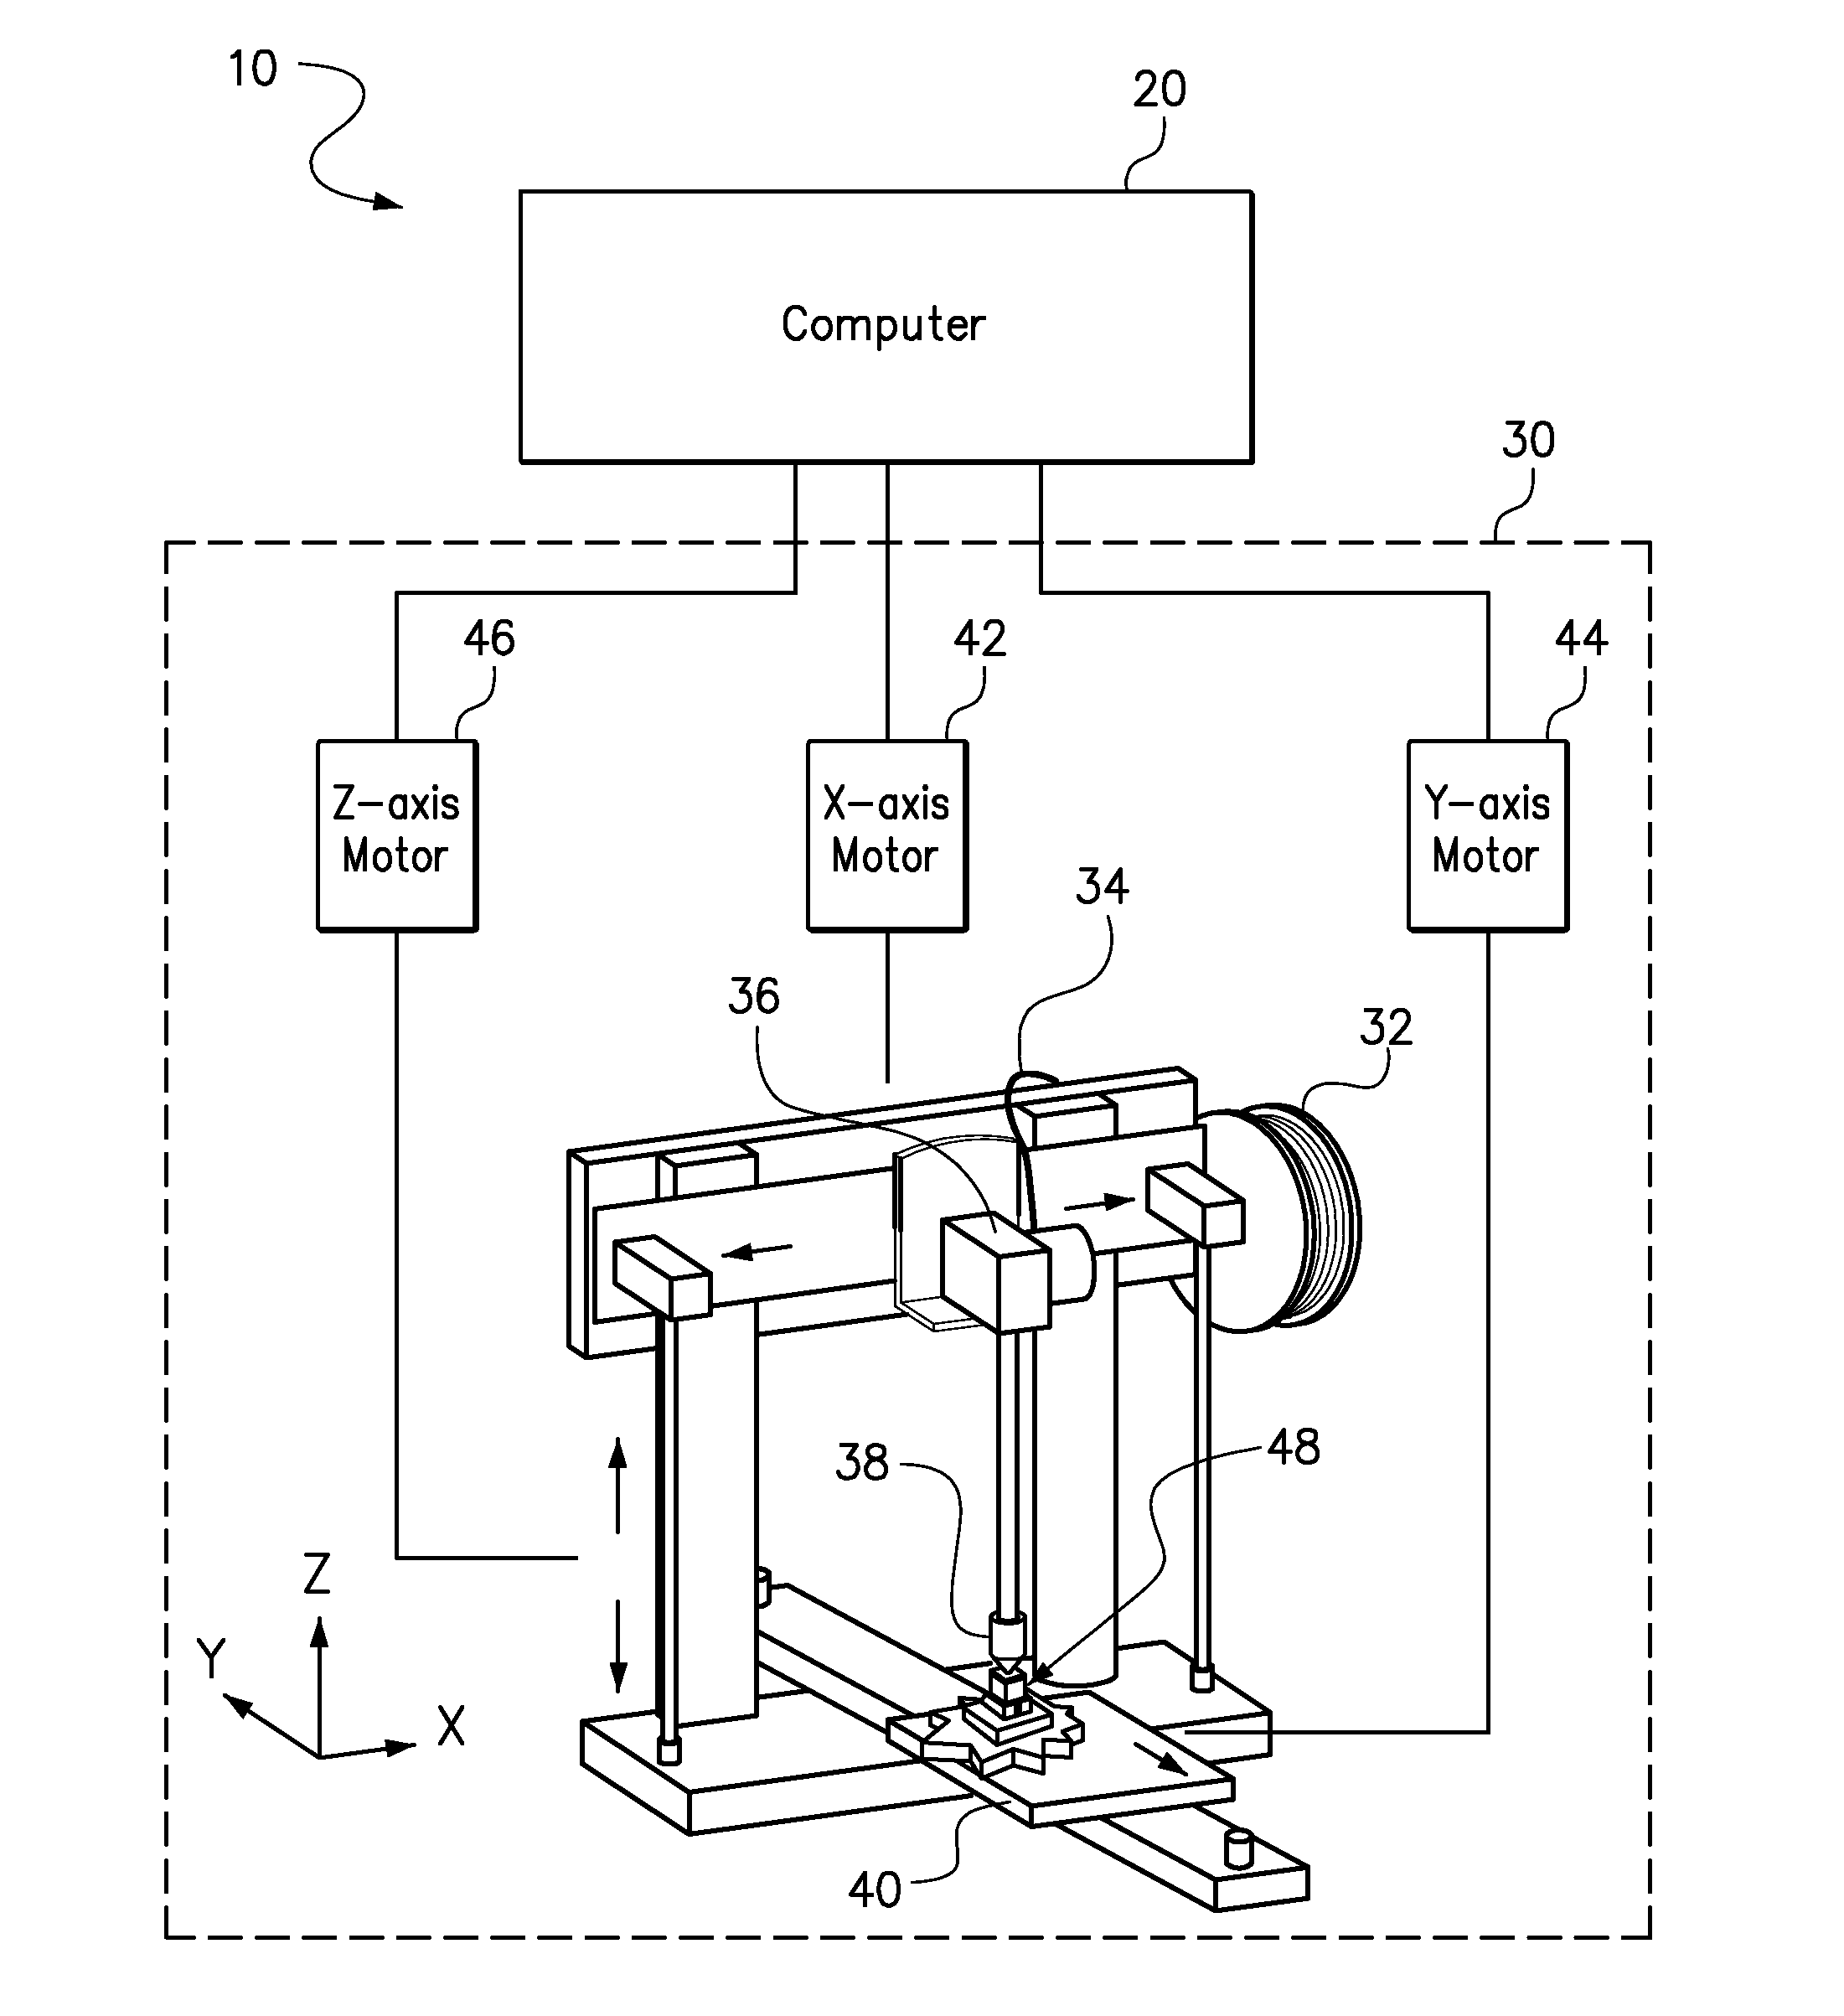 Modifying a three-dimensional object to be printed without exceeding a time or cost threshold